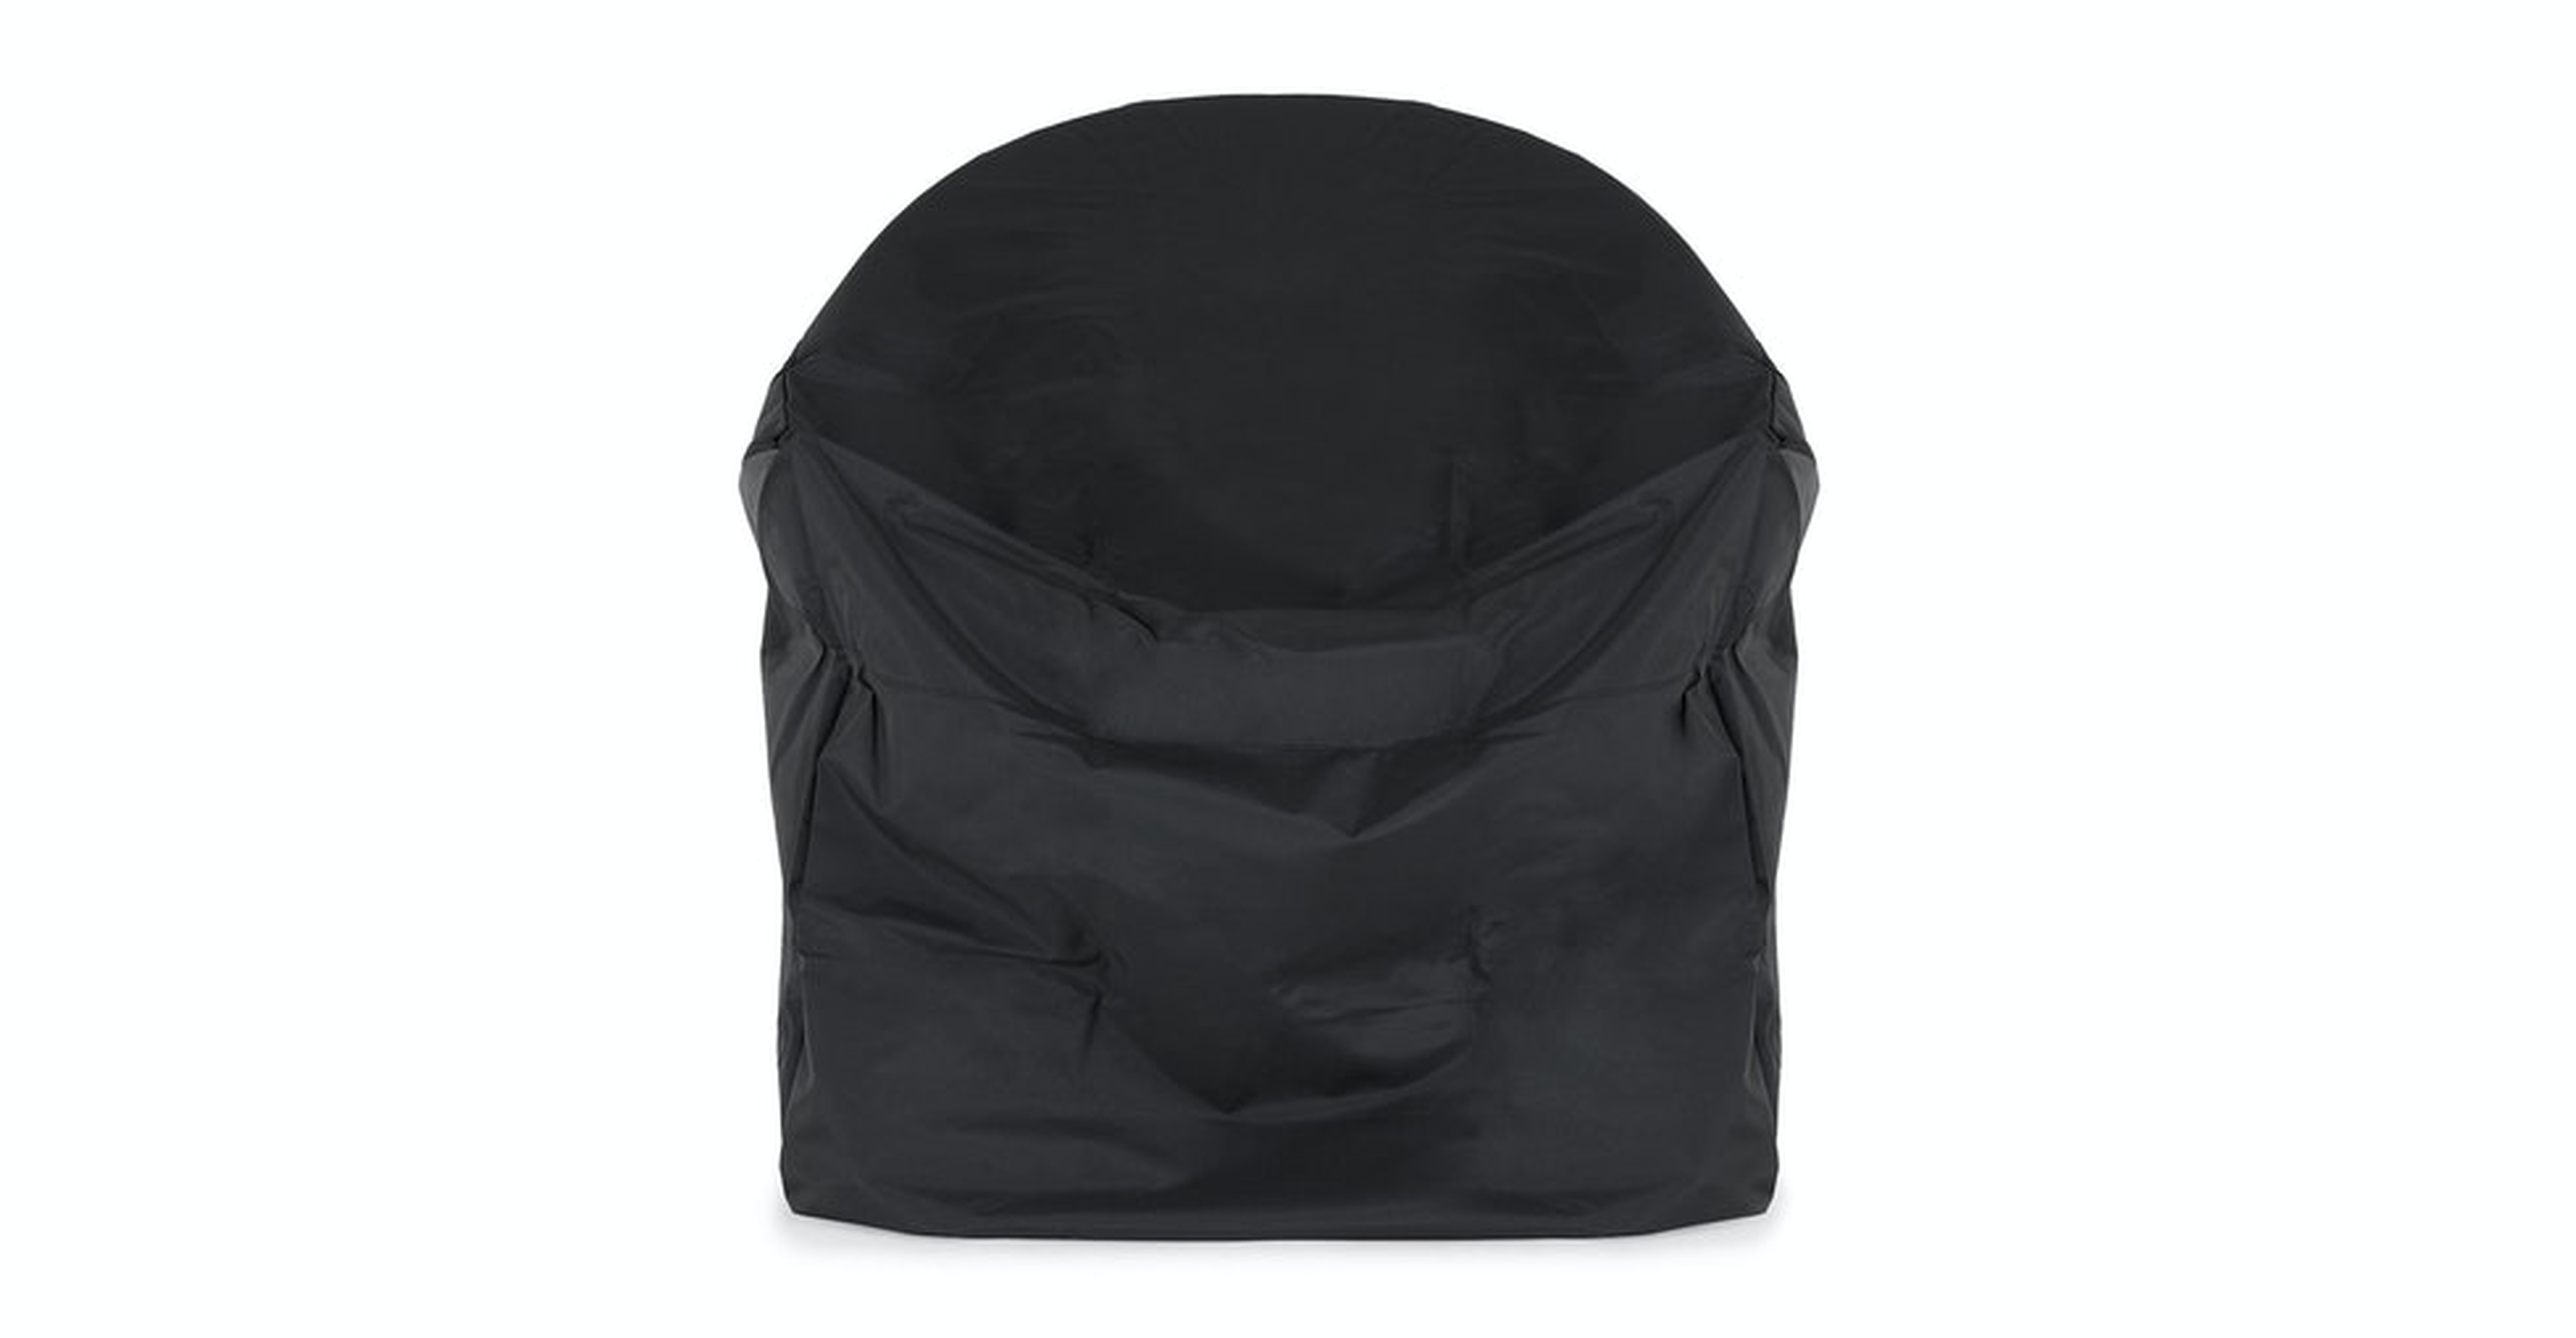 Lemtov XL Lounge Chair Cover - Article